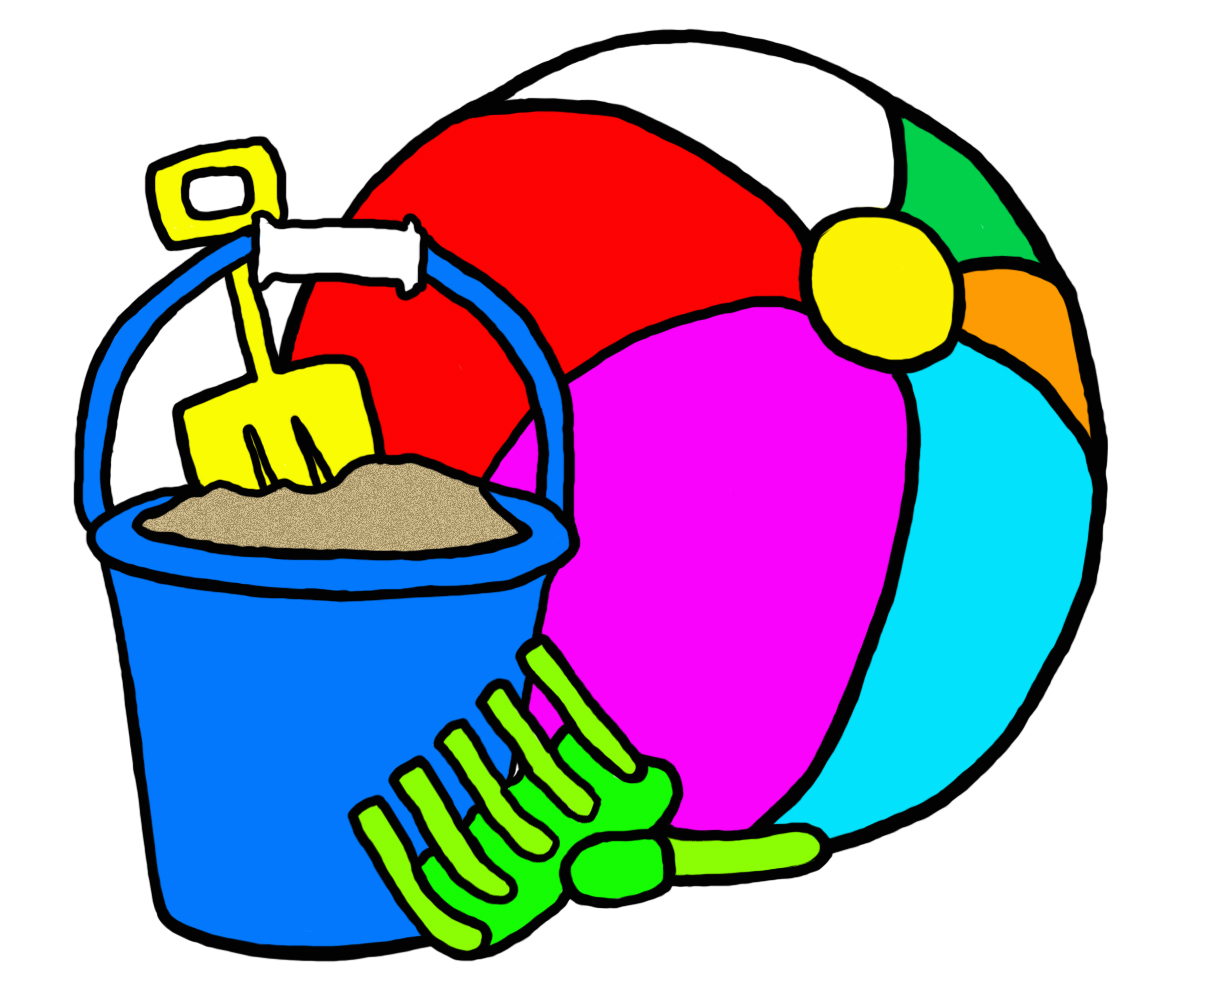 Free beach ball clipart free clip art images image 4